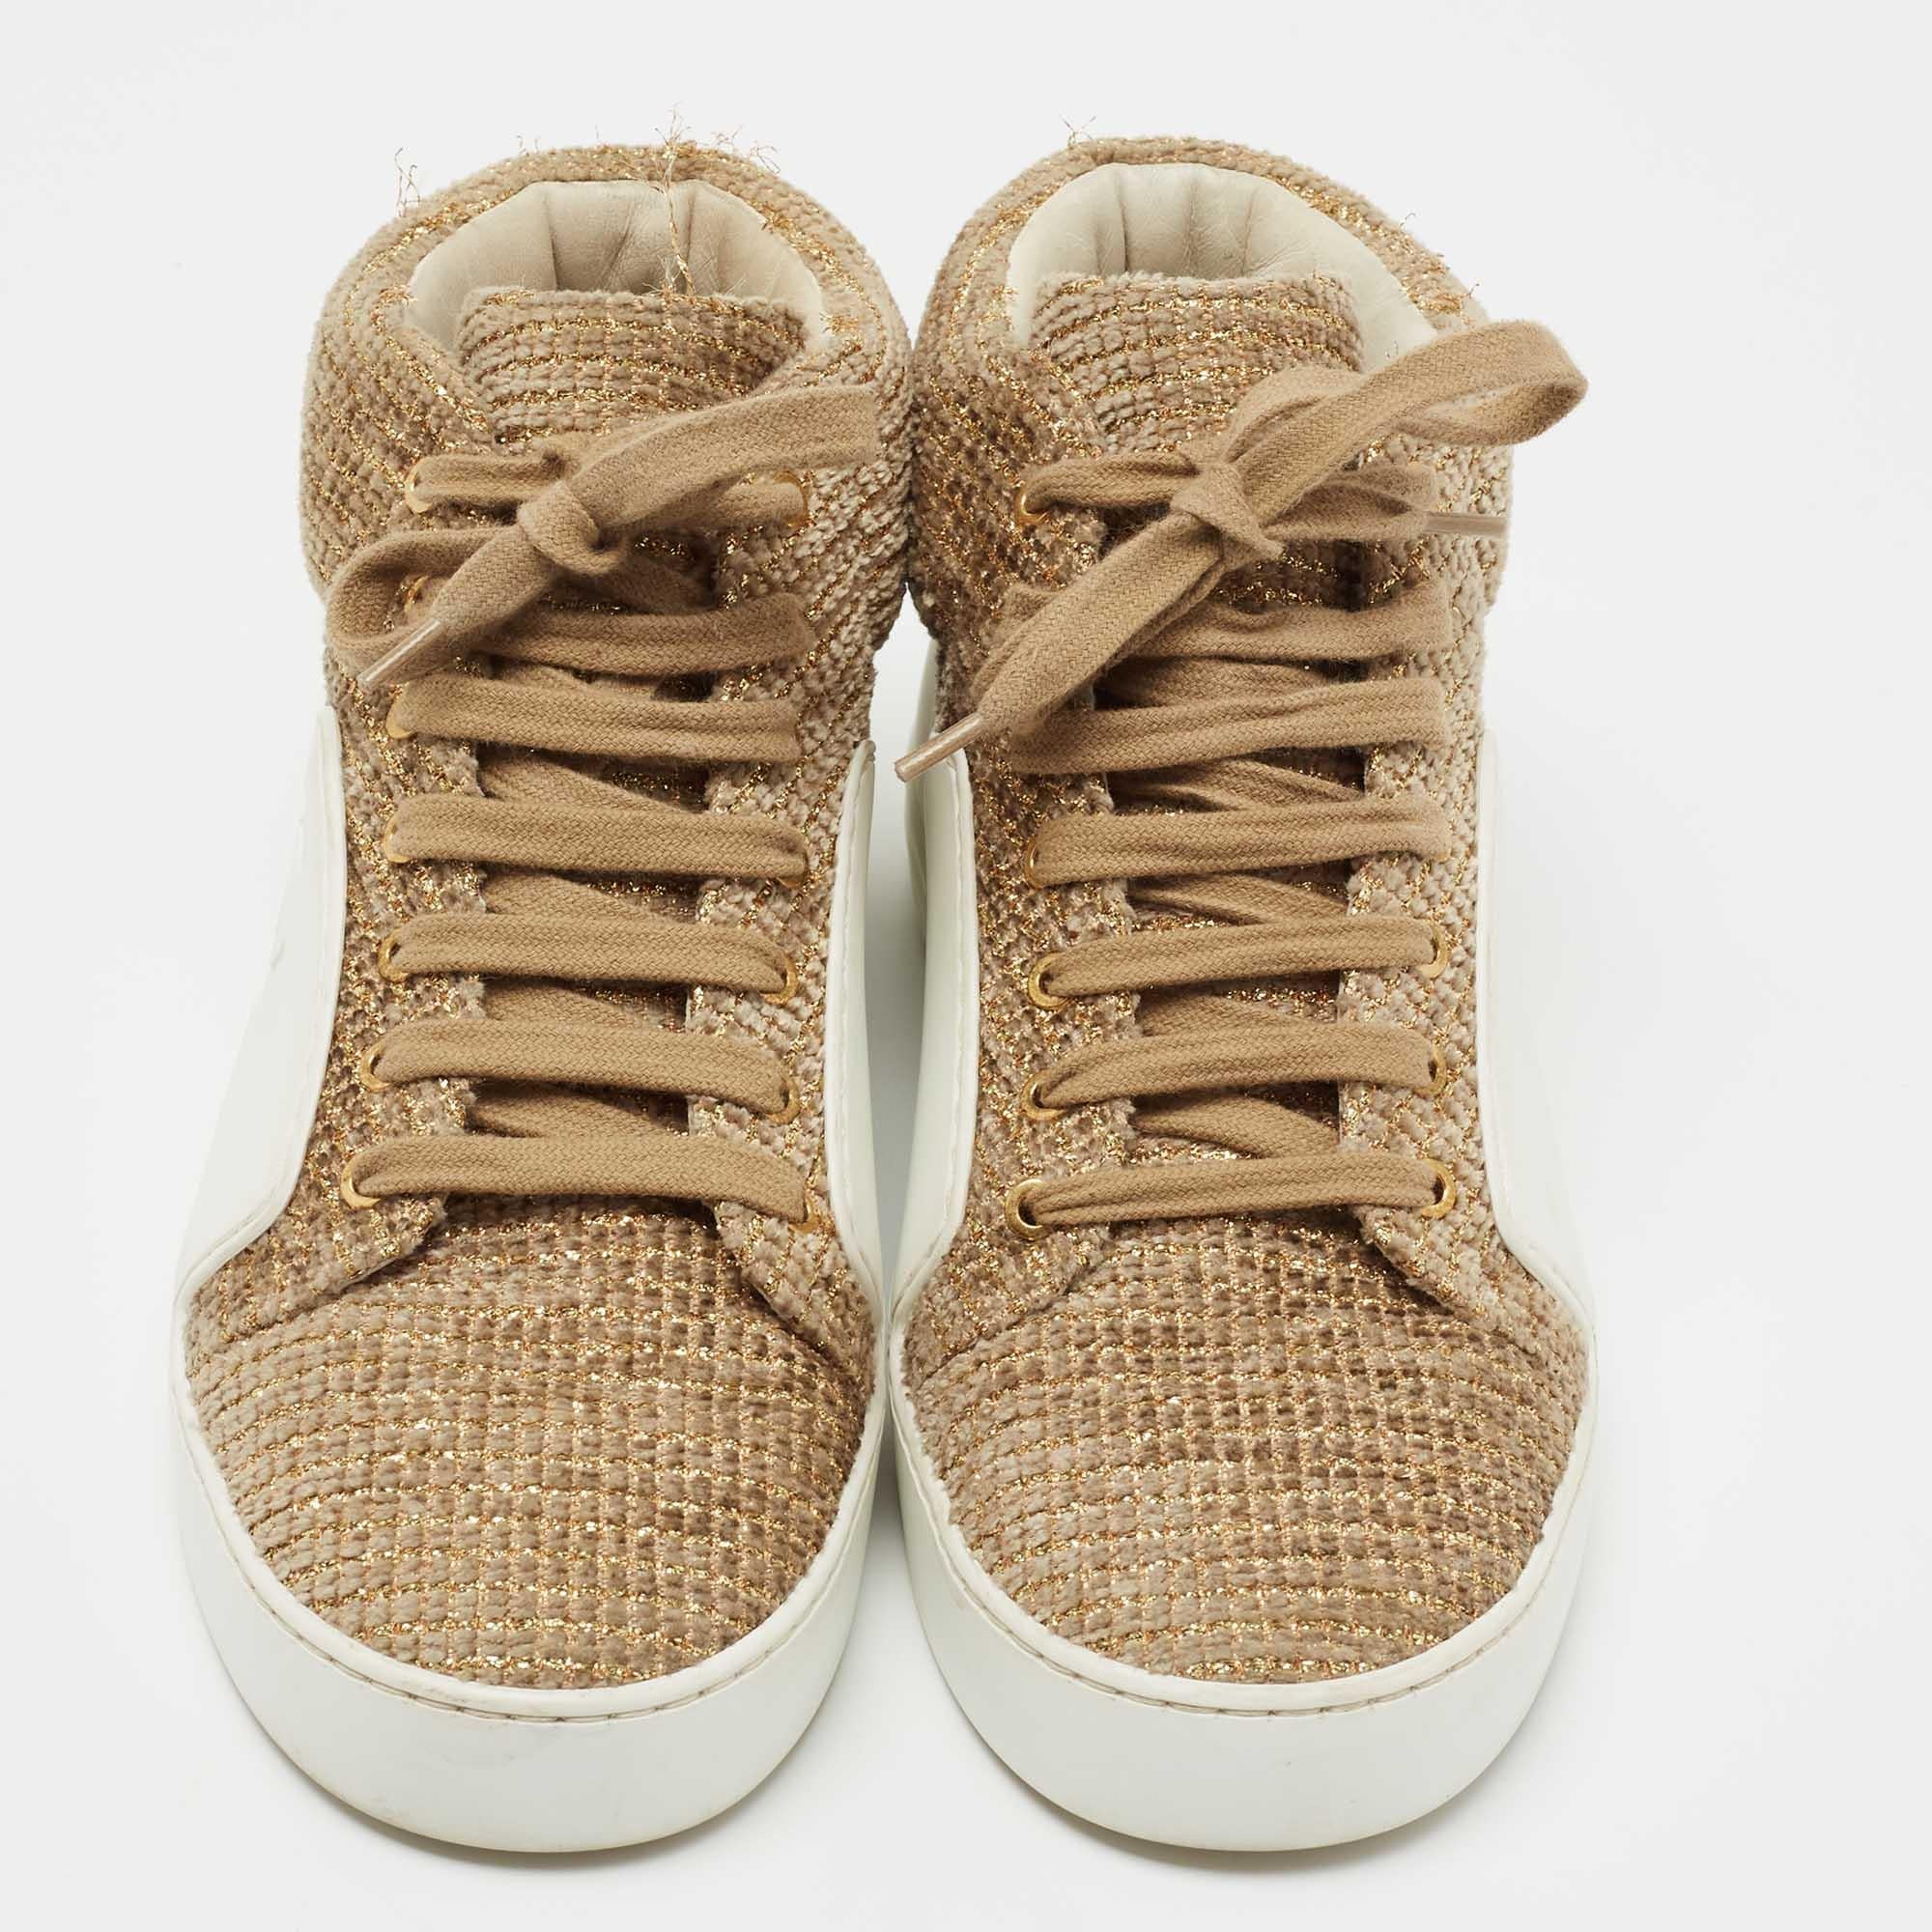 Chanel White/Gold Tweed and Leather CC High Top Sneakers Size 36.5 2